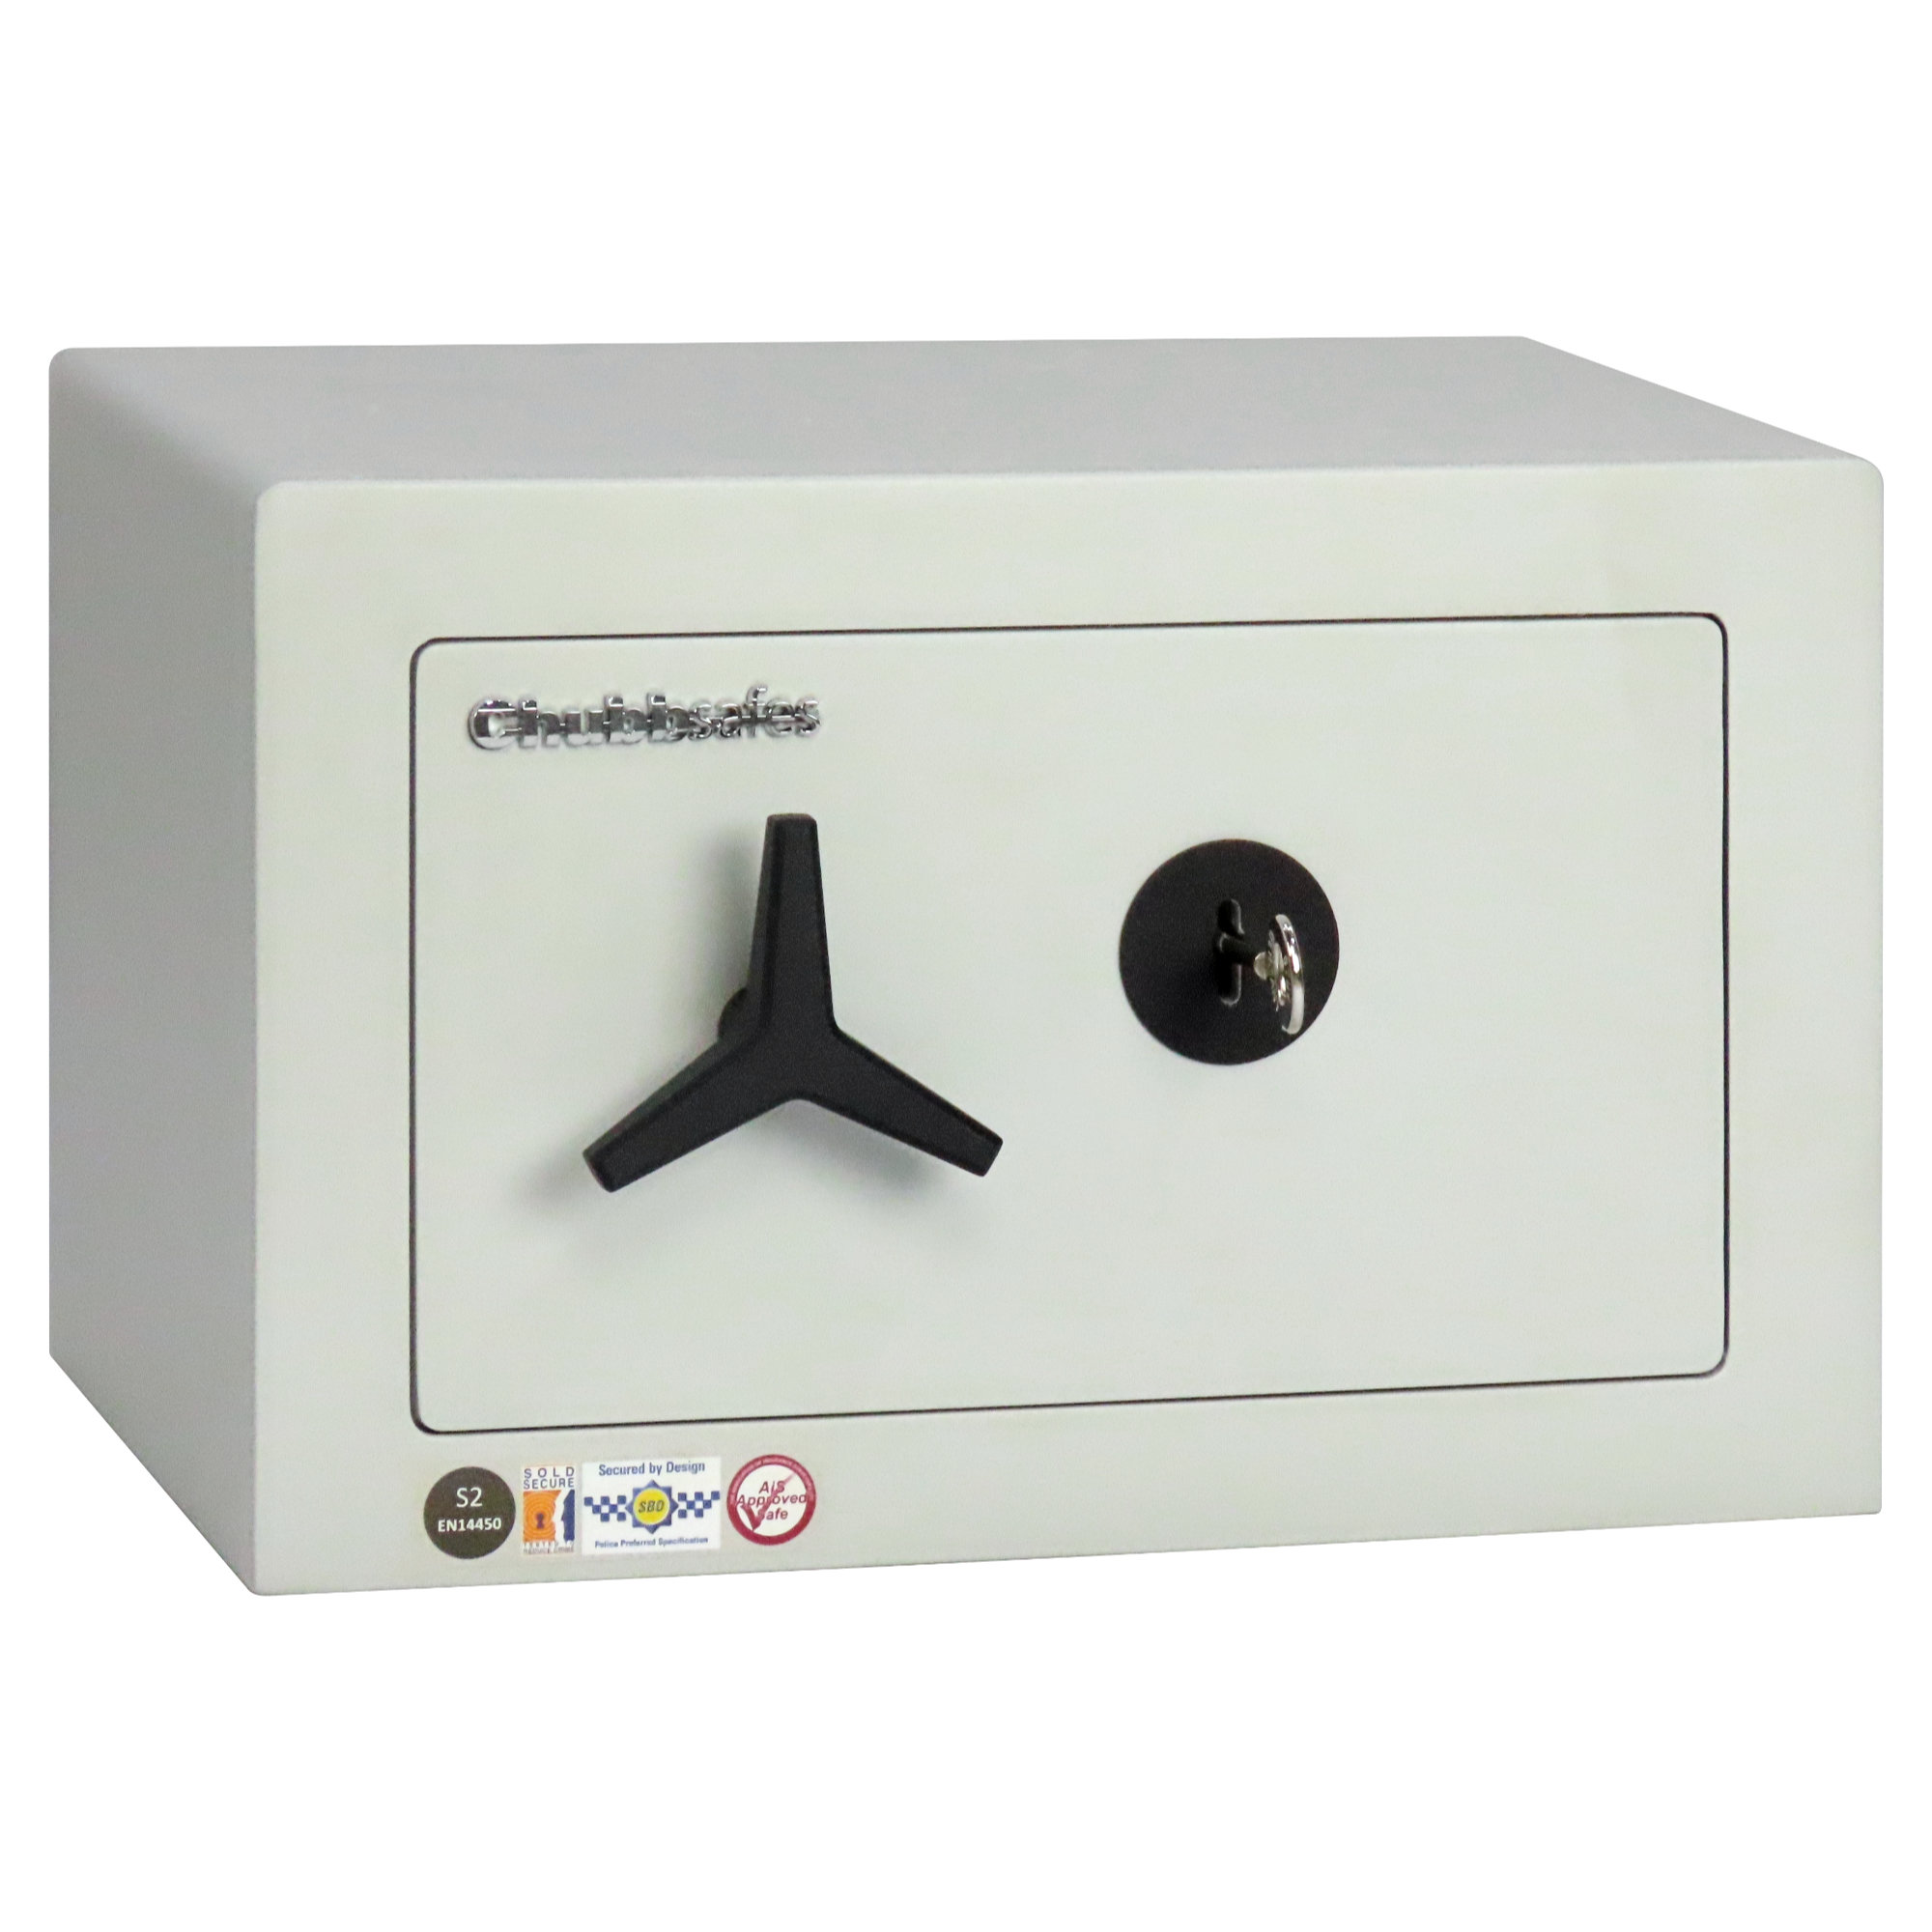 The Chubbsafes HomeVault S2 15KL is a £4000 rated security safe for the home or office safe that comes with a quality key lock and 2 keys. Easy to open. Turn the key and then turn the propeller handle to move its steel locking bolts.